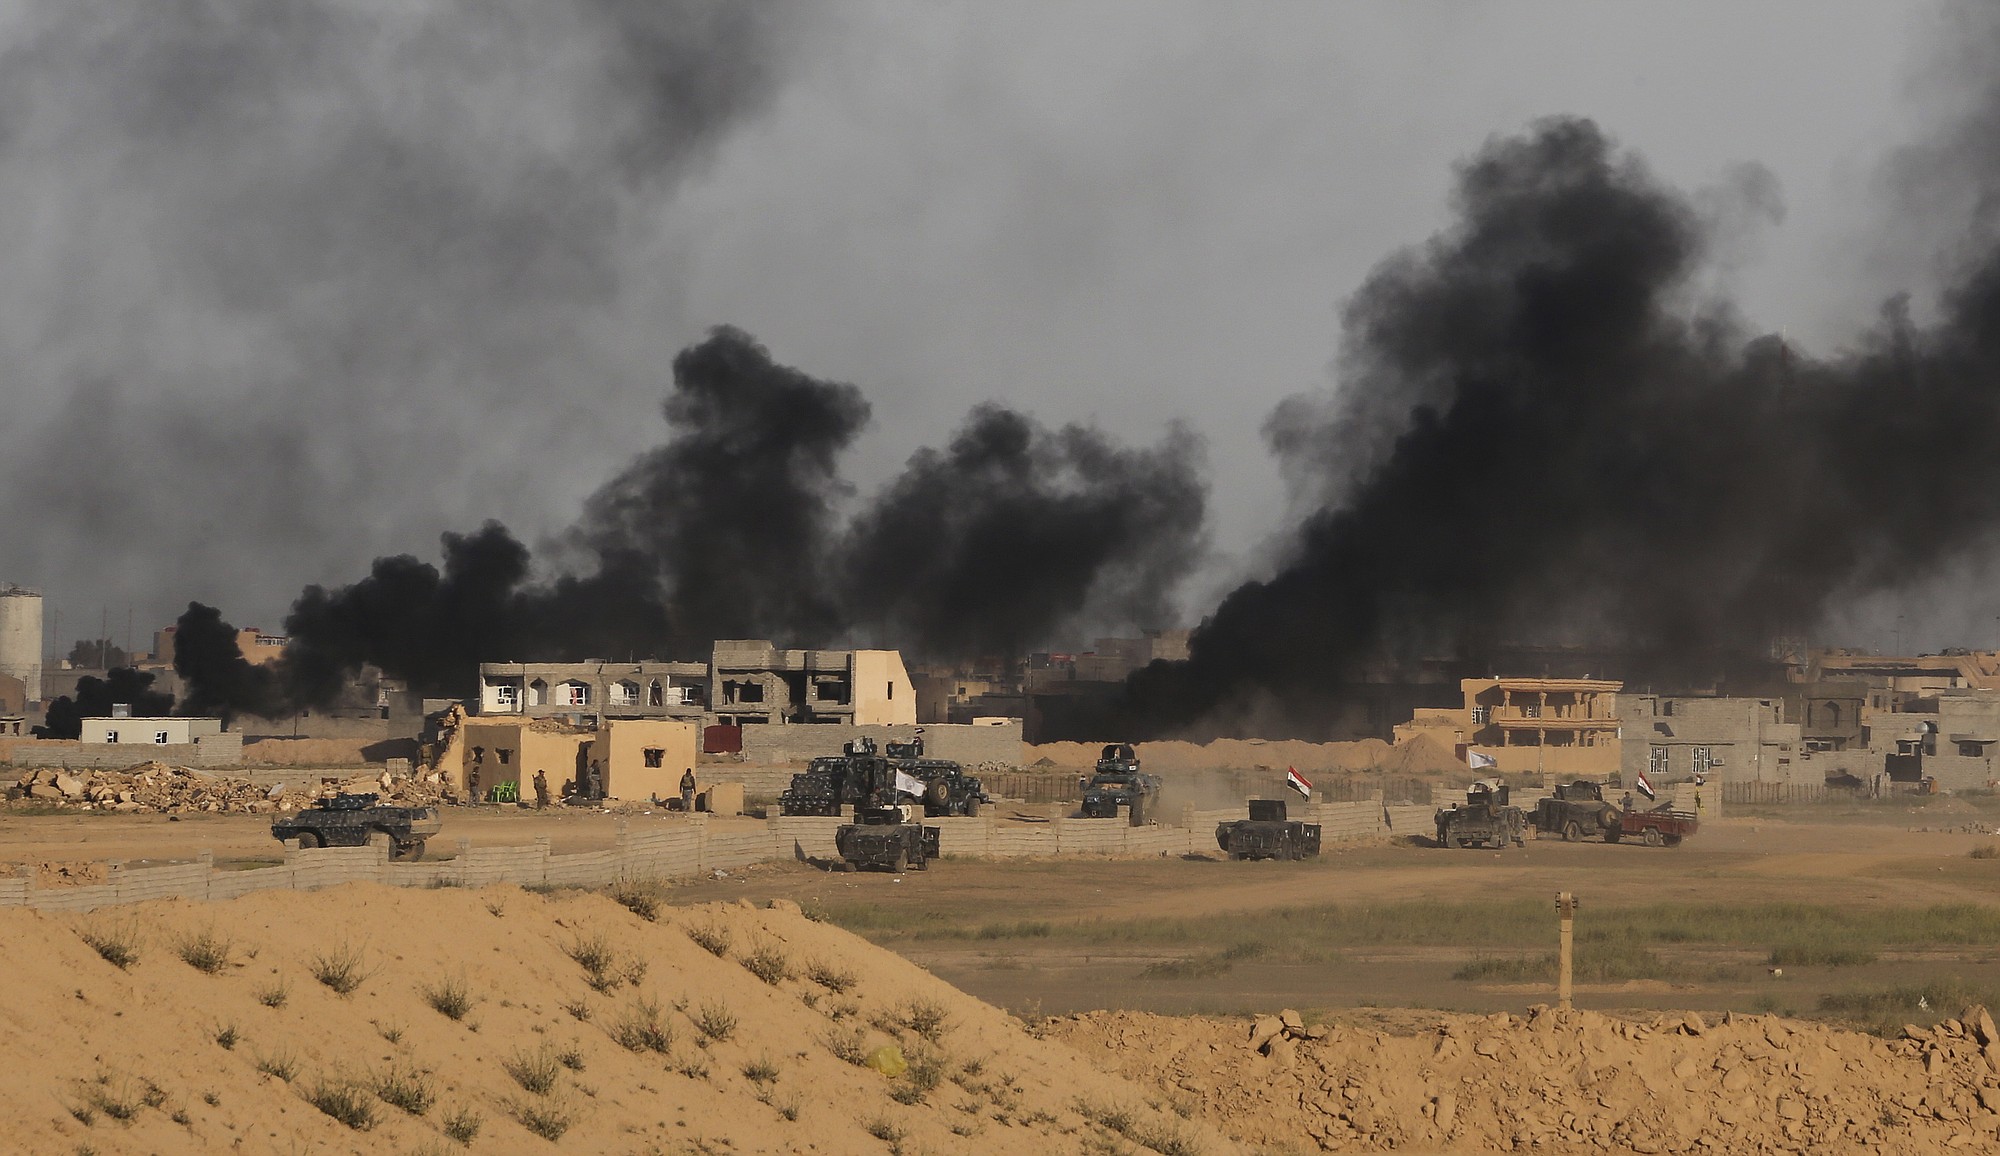 Iraqi security forces prepare to attack Islamic State extremist positions as smoke rises from central Tikrit during clashes in the city, 130 kilometers (80 miles) north of Baghdad, Iraq, on Friday.